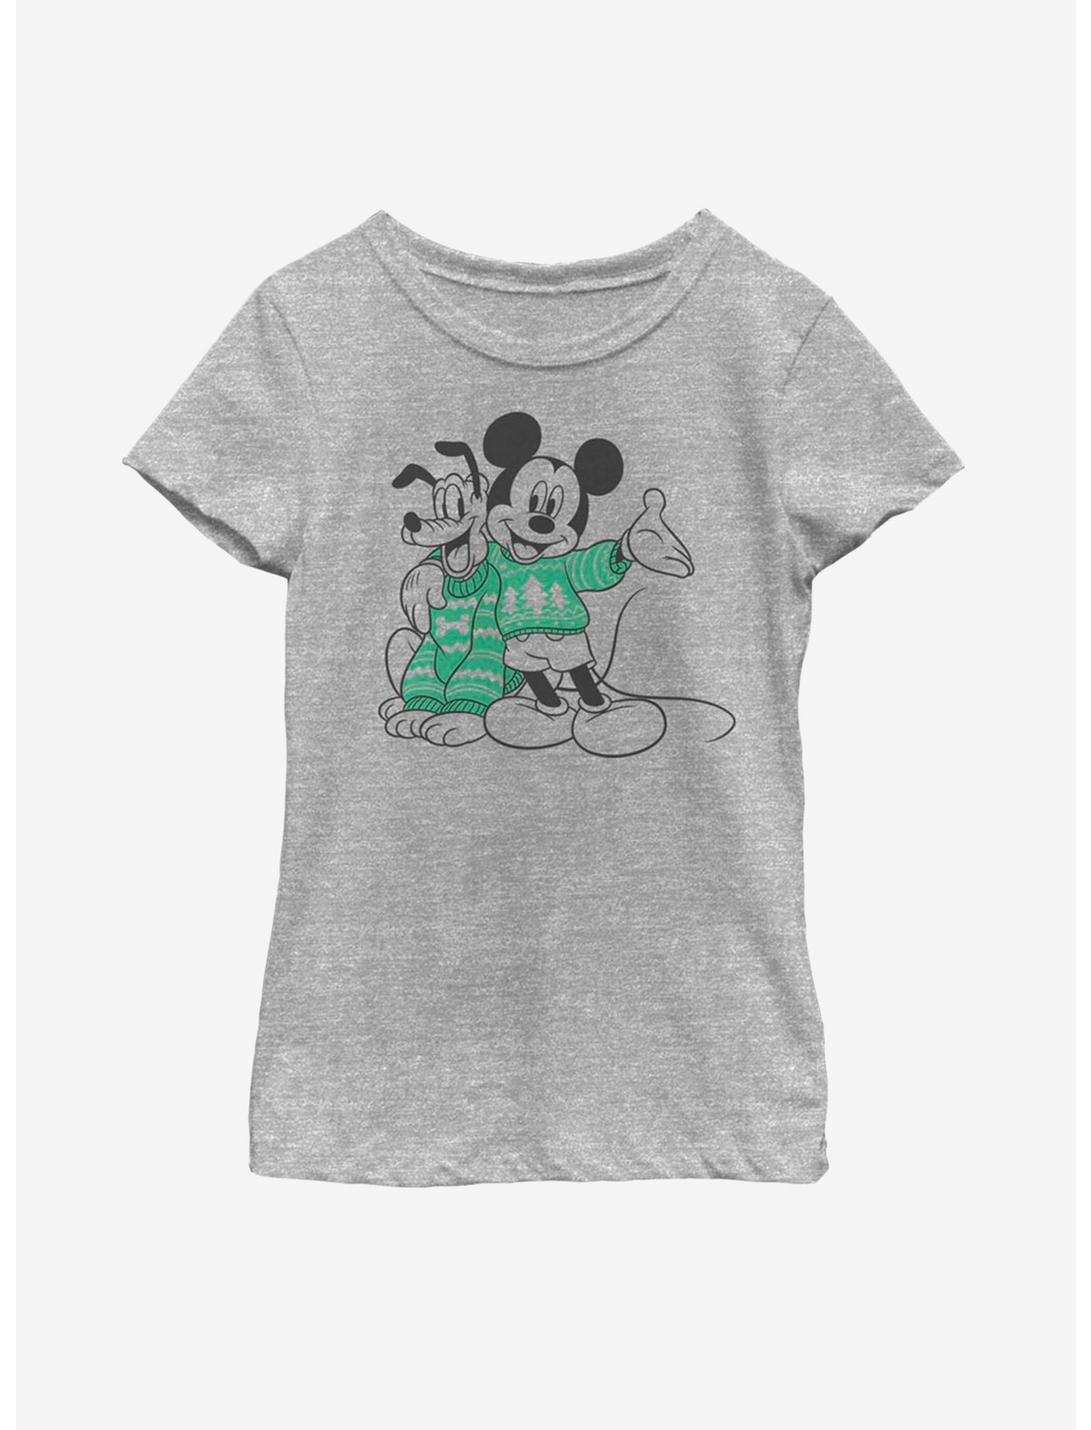 Disney Mickey Mouse Christmas Pattern Pals Youth Girls T-Shirt, ATH HTR, hi-res